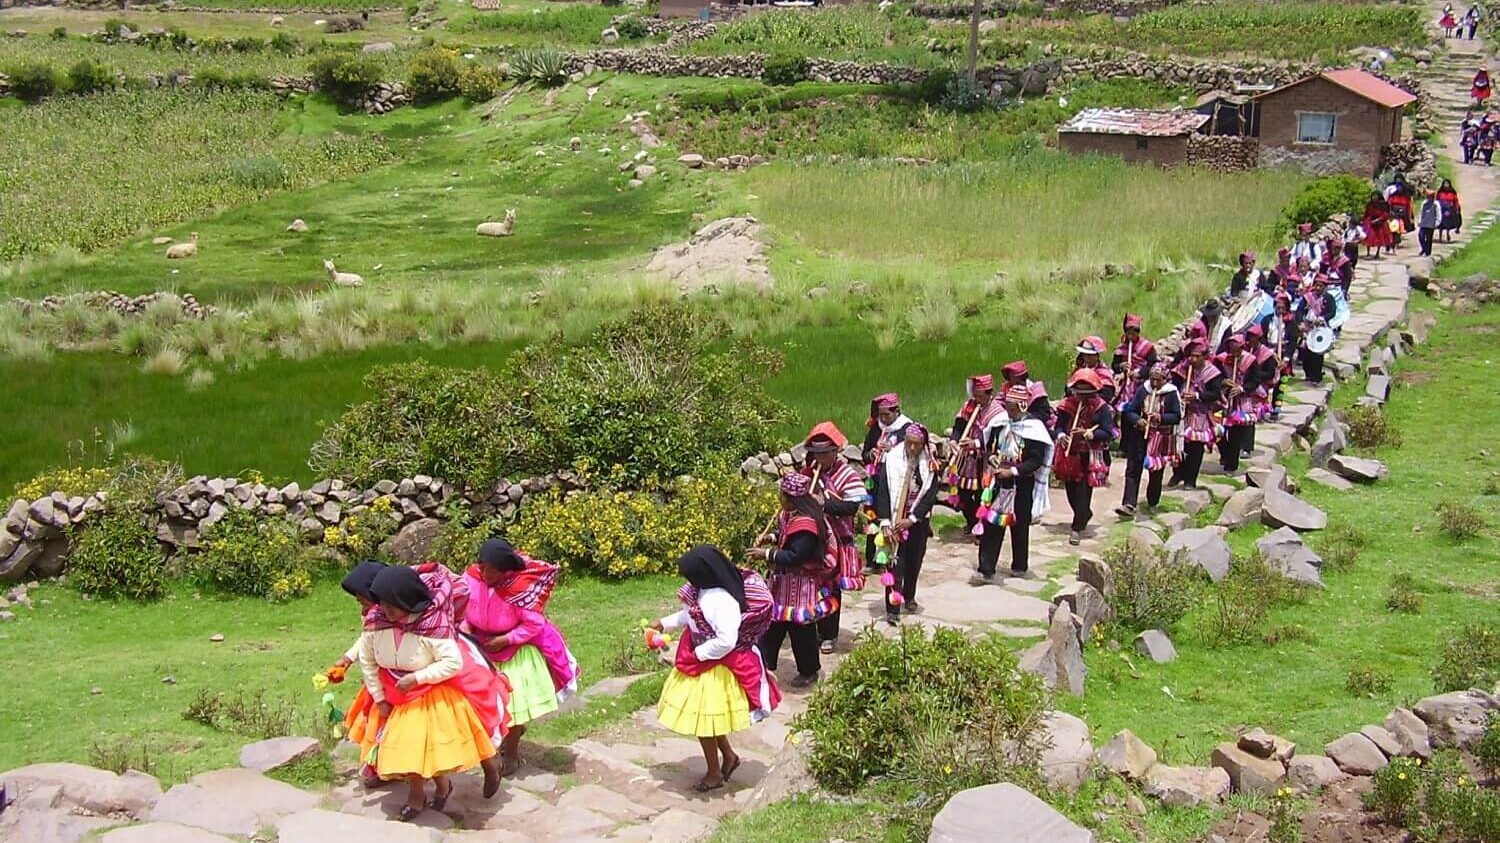 A marching band with dancing women, all wearing traditional dresses for the fiesta, at Taquile island, Lake Titicaca, Peru | RESPONSible Travel Peru